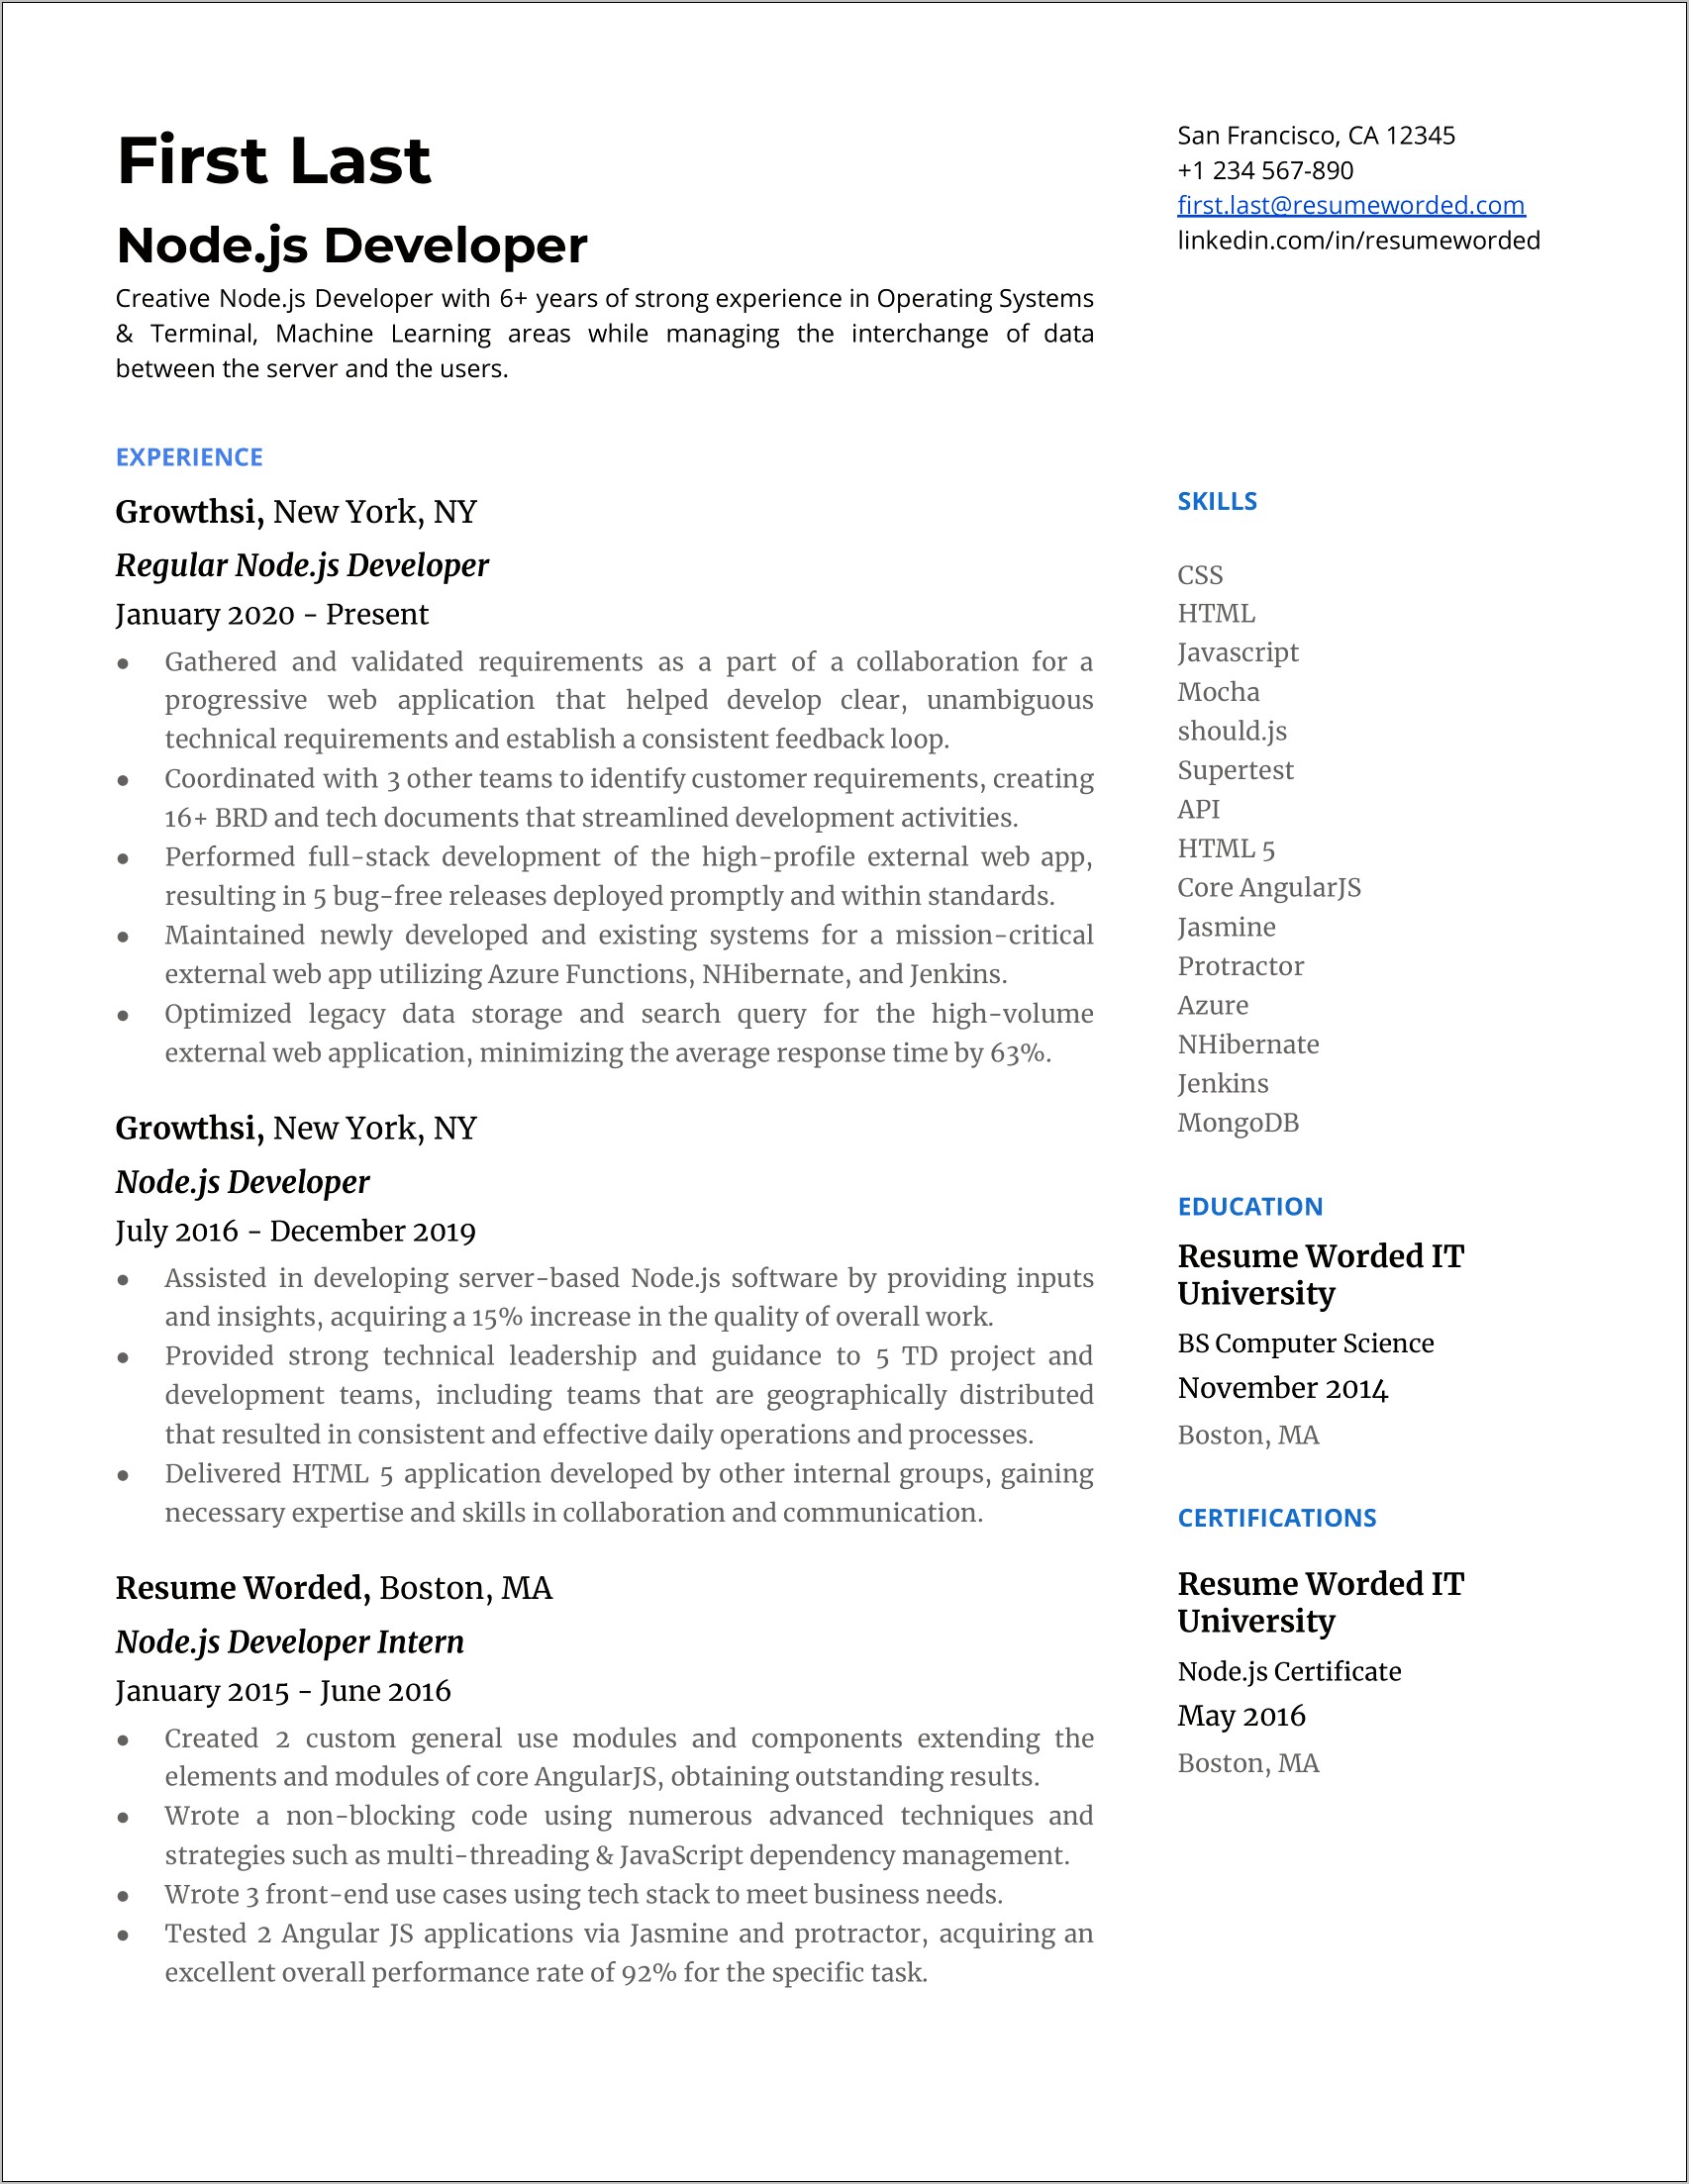 Sperating Technical Skills And Other Skills On Resume